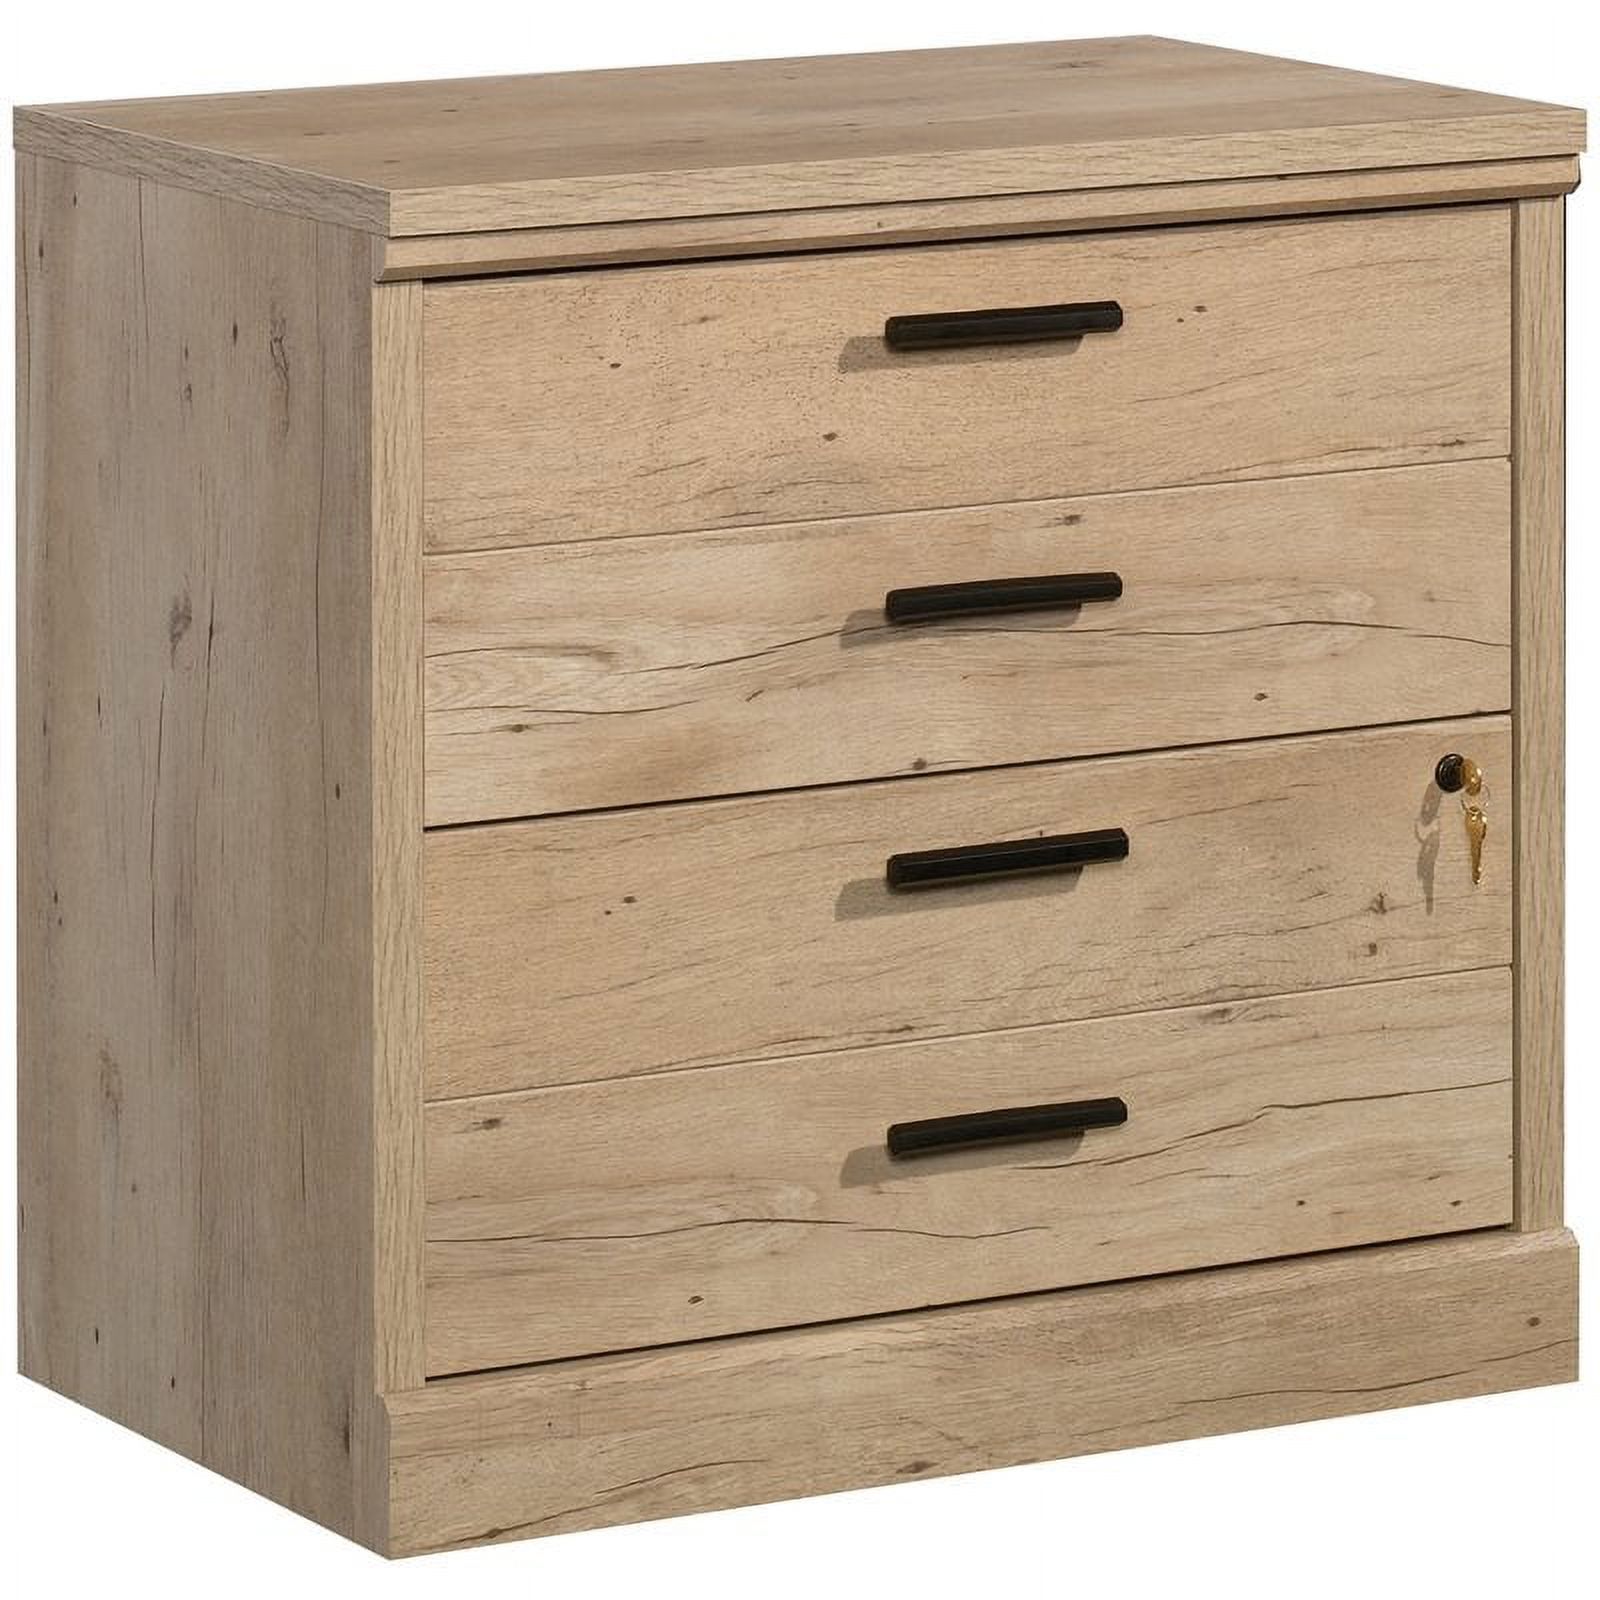 UrbanPro 2-Drawer Modern Engineered Wood Lateral File Cabinet in Prime Oak - image 1 of 10